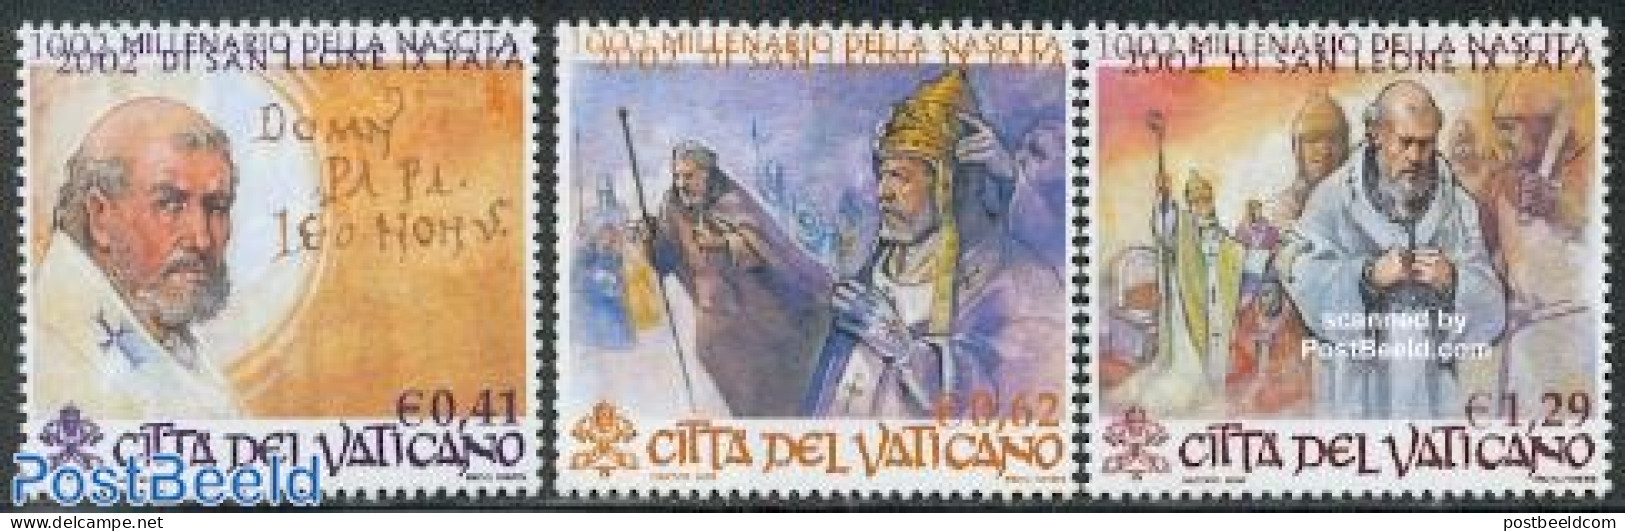 Vatican 2002 Pope S. Leone IX 3v (1v With Tab), Mint NH, Religion - Pope - Religion - Neufs